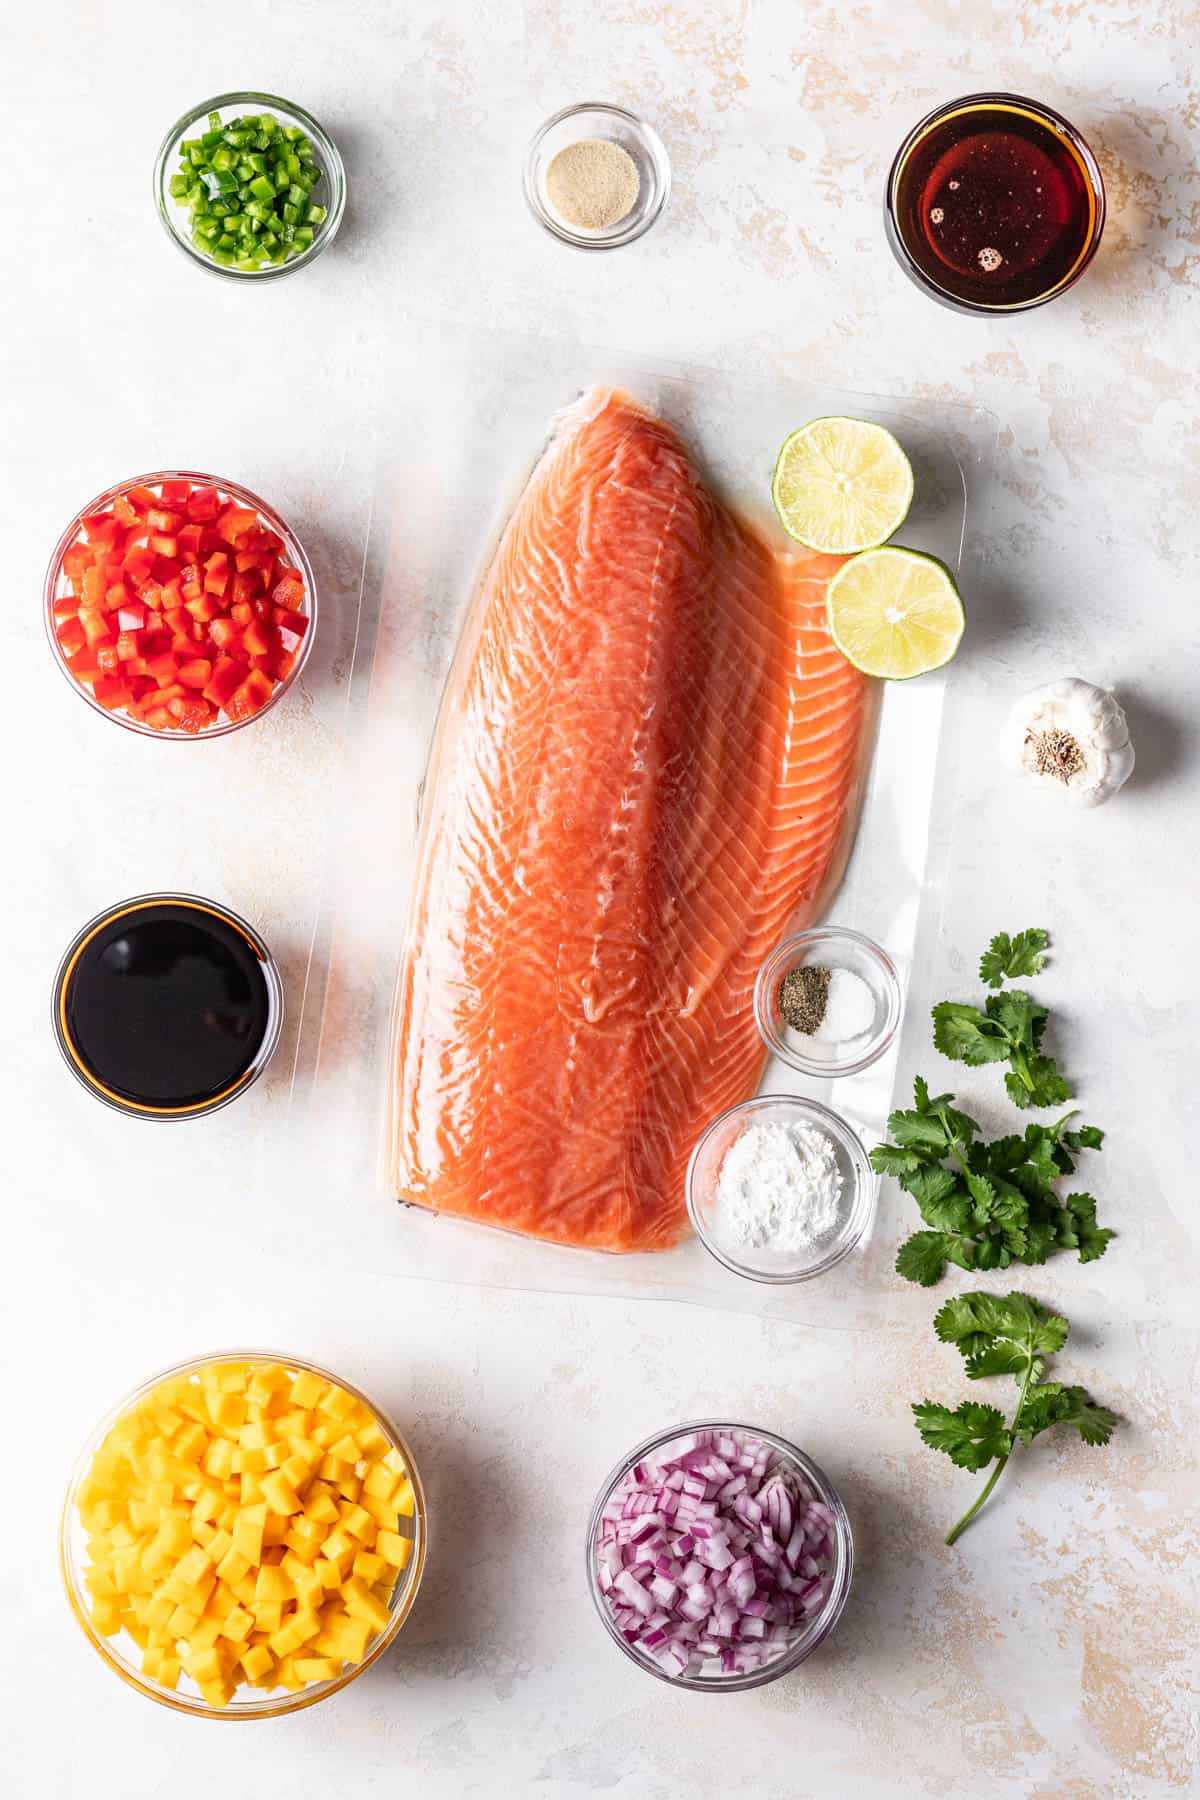 Ingredients for making baked salmon with mango salsa.